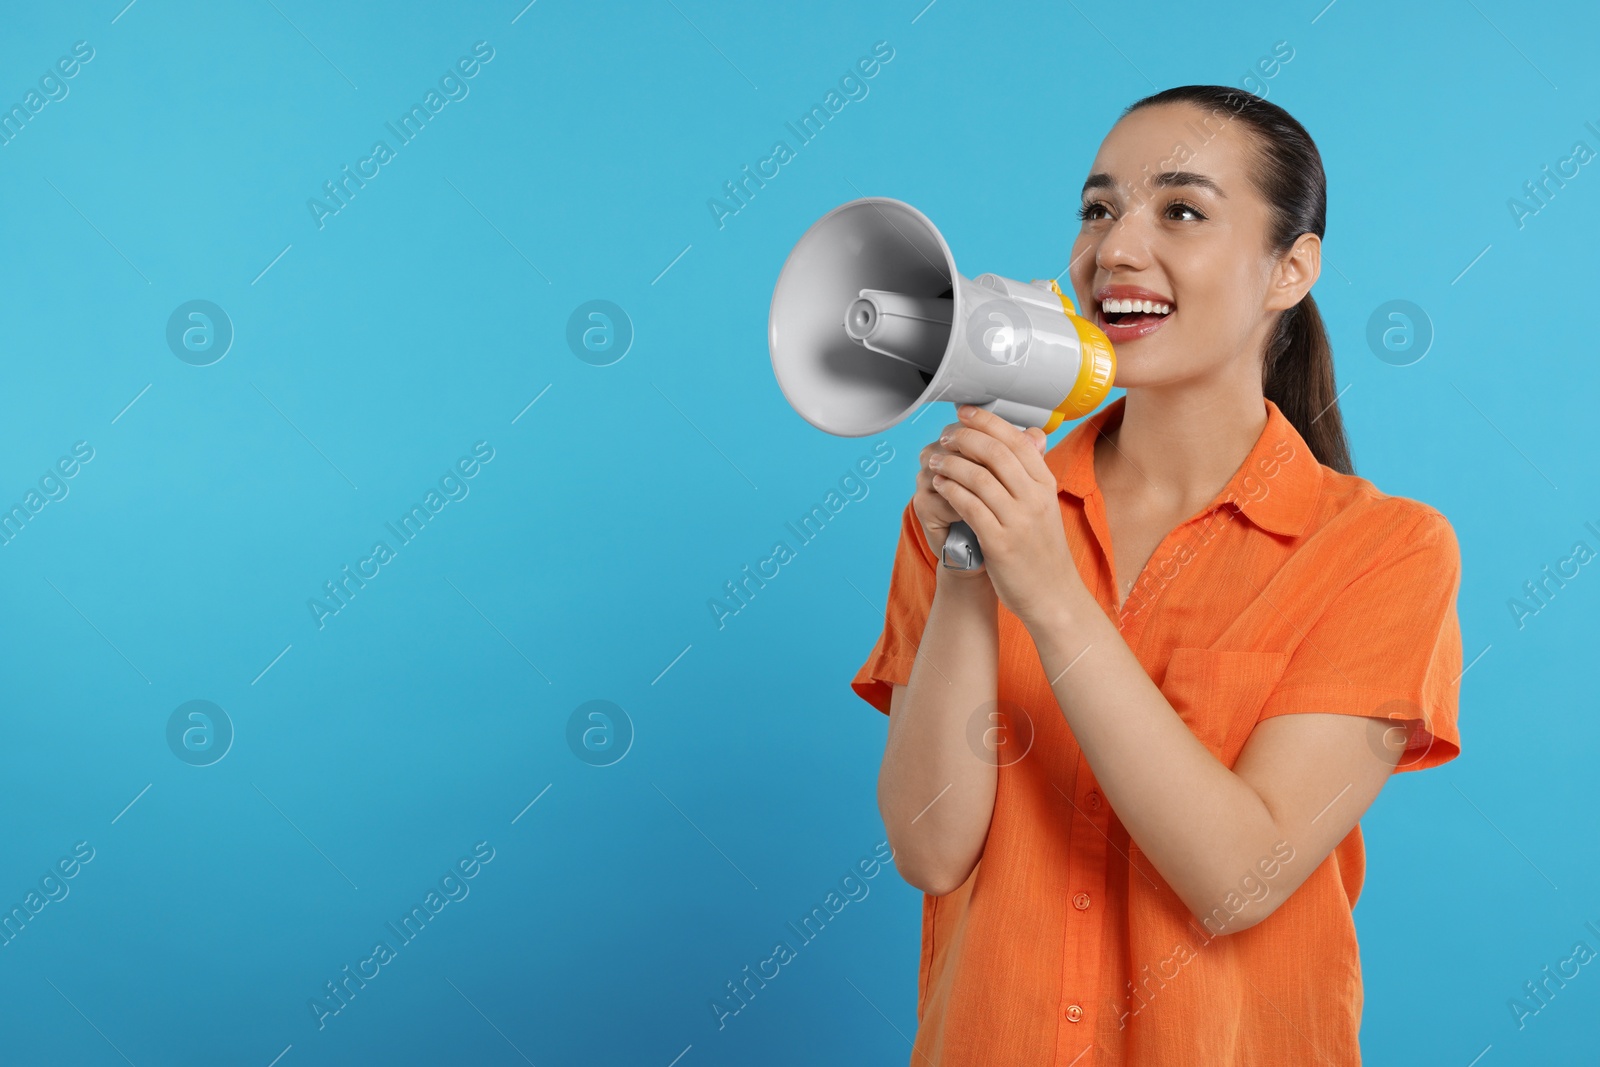 Photo of Special promotion. Smiling woman with megaphone on light blue background. Space for text